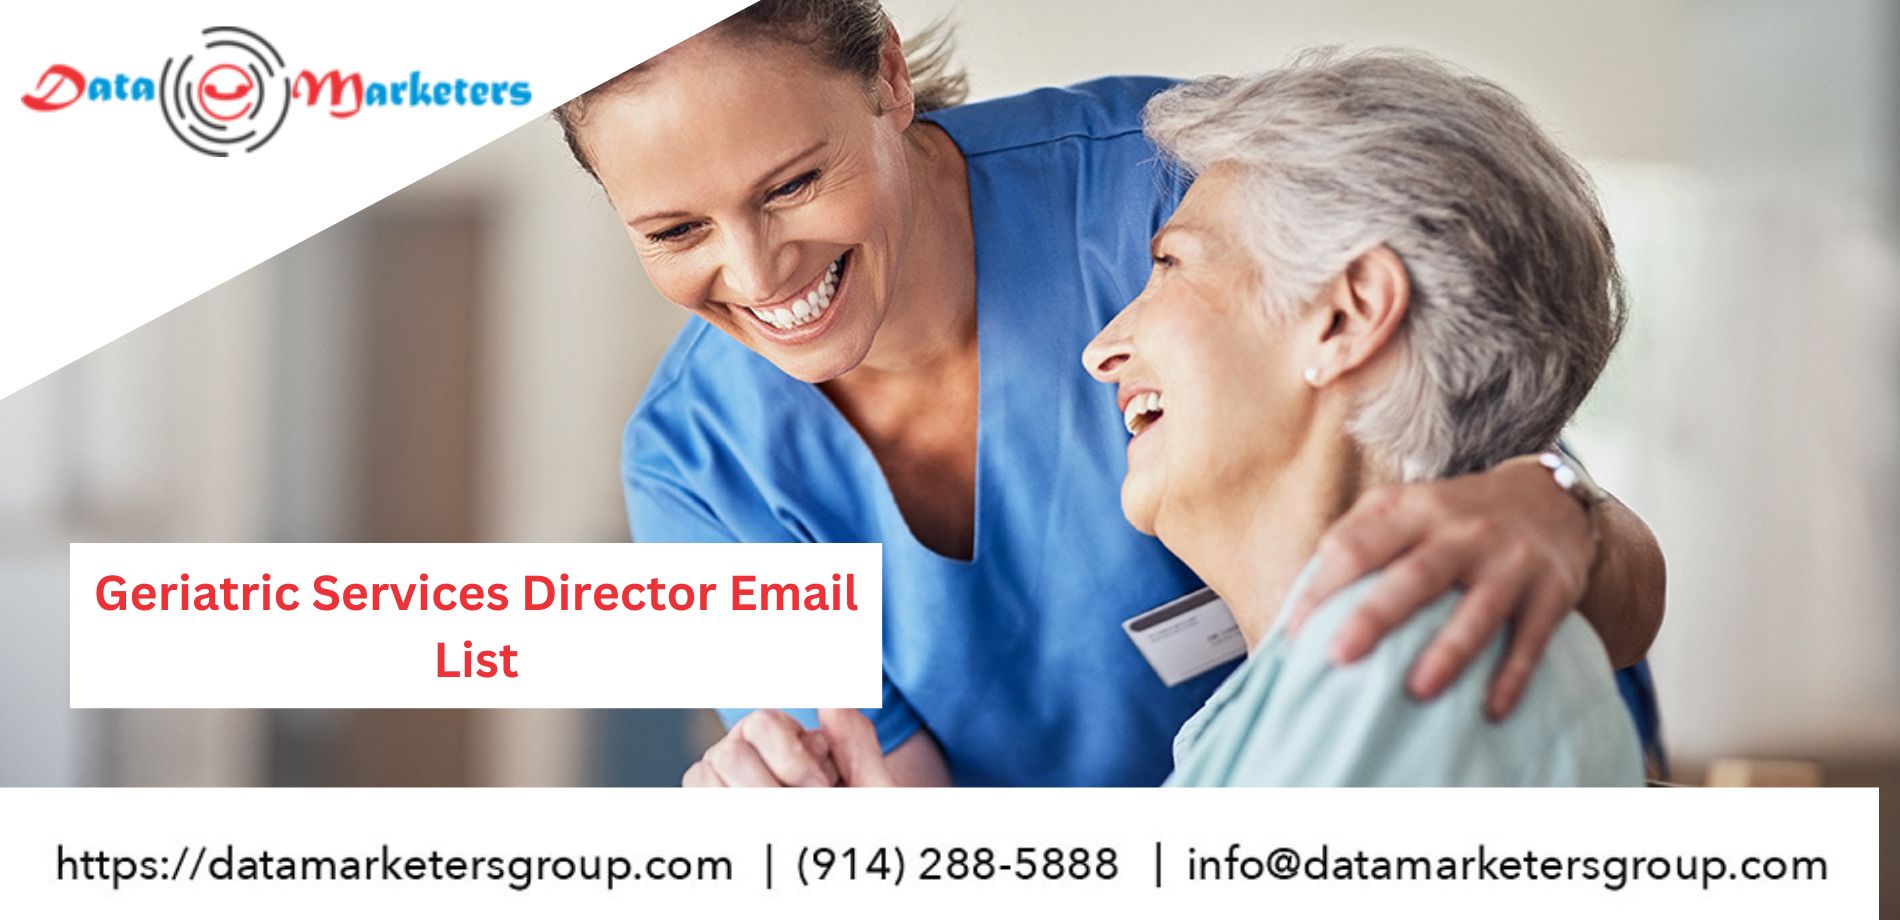 Geriatric Services Director Email List | Data Marketers Group